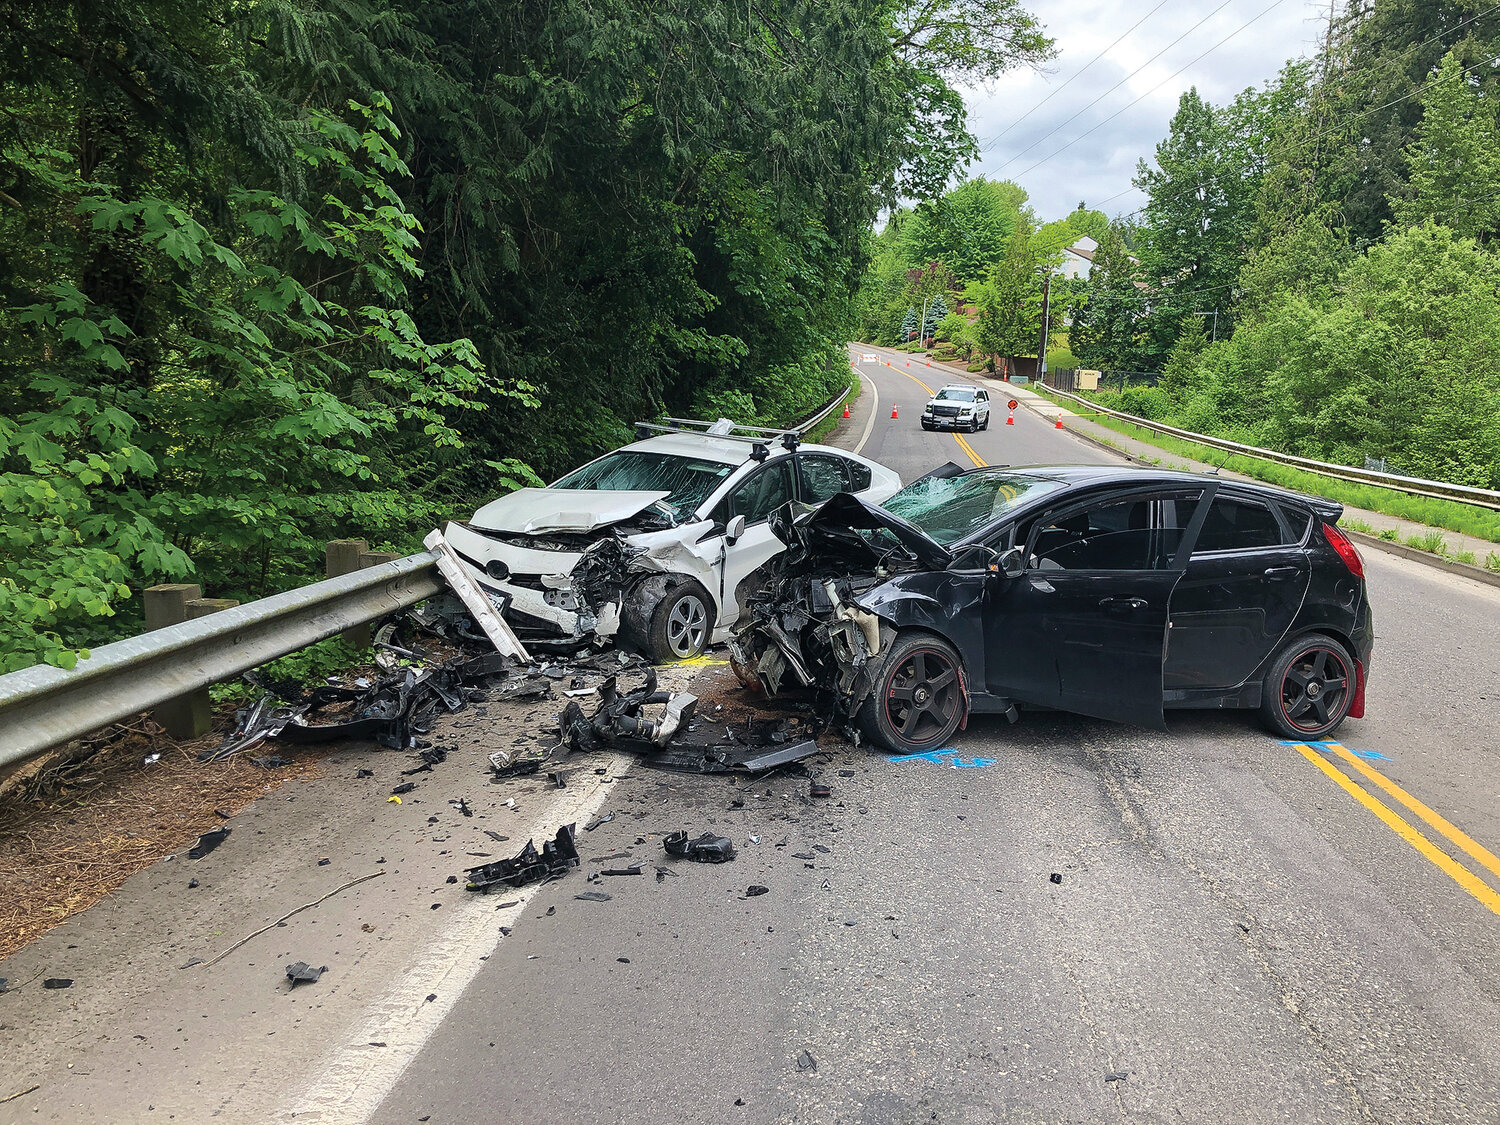 Law enforcement responded to a two-vehicle injury collision in Ridgefield on May 23.